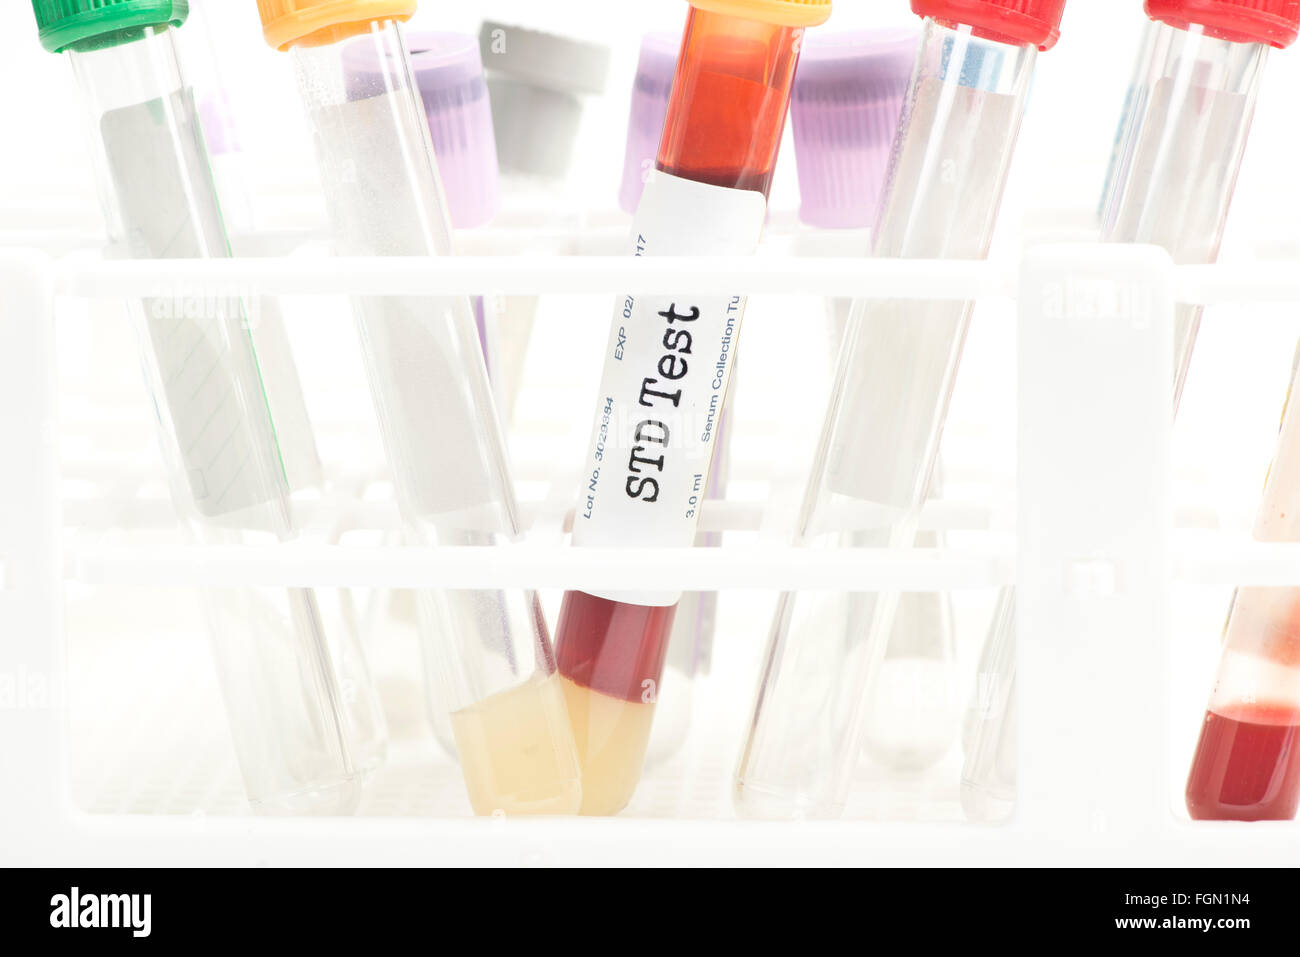 STD blood analysis collection tube with test tube rack.  Labels and document are fictitious and created by the photographer. Stock Photo